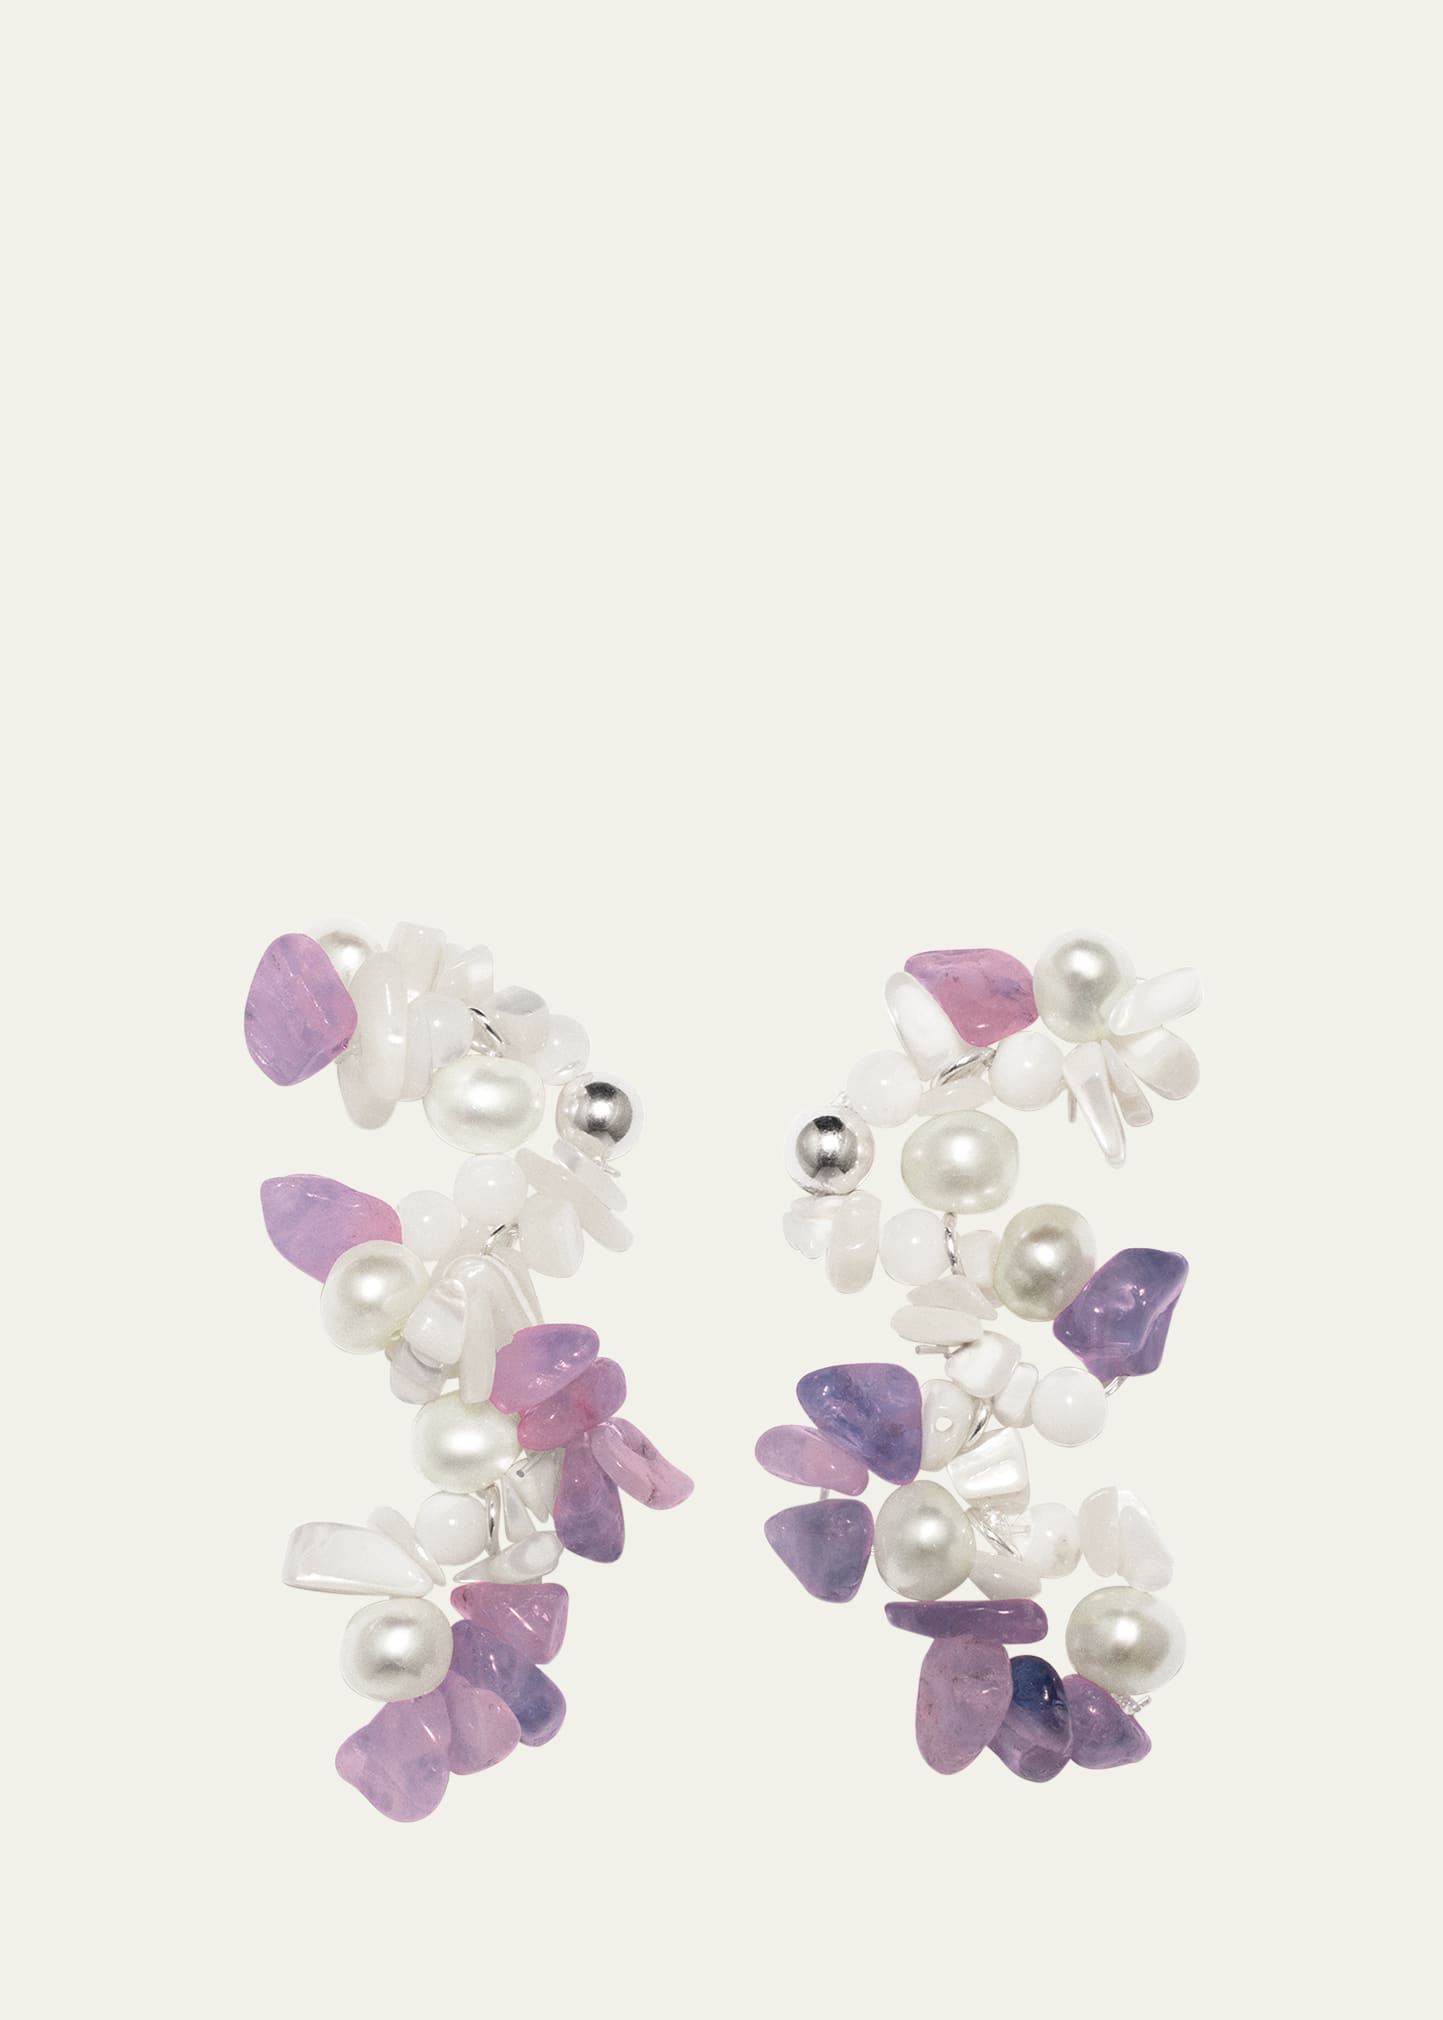 Recycled Sterling Silver Drop Earrings With Pearl, Mother Of Pearl, And Amethyst